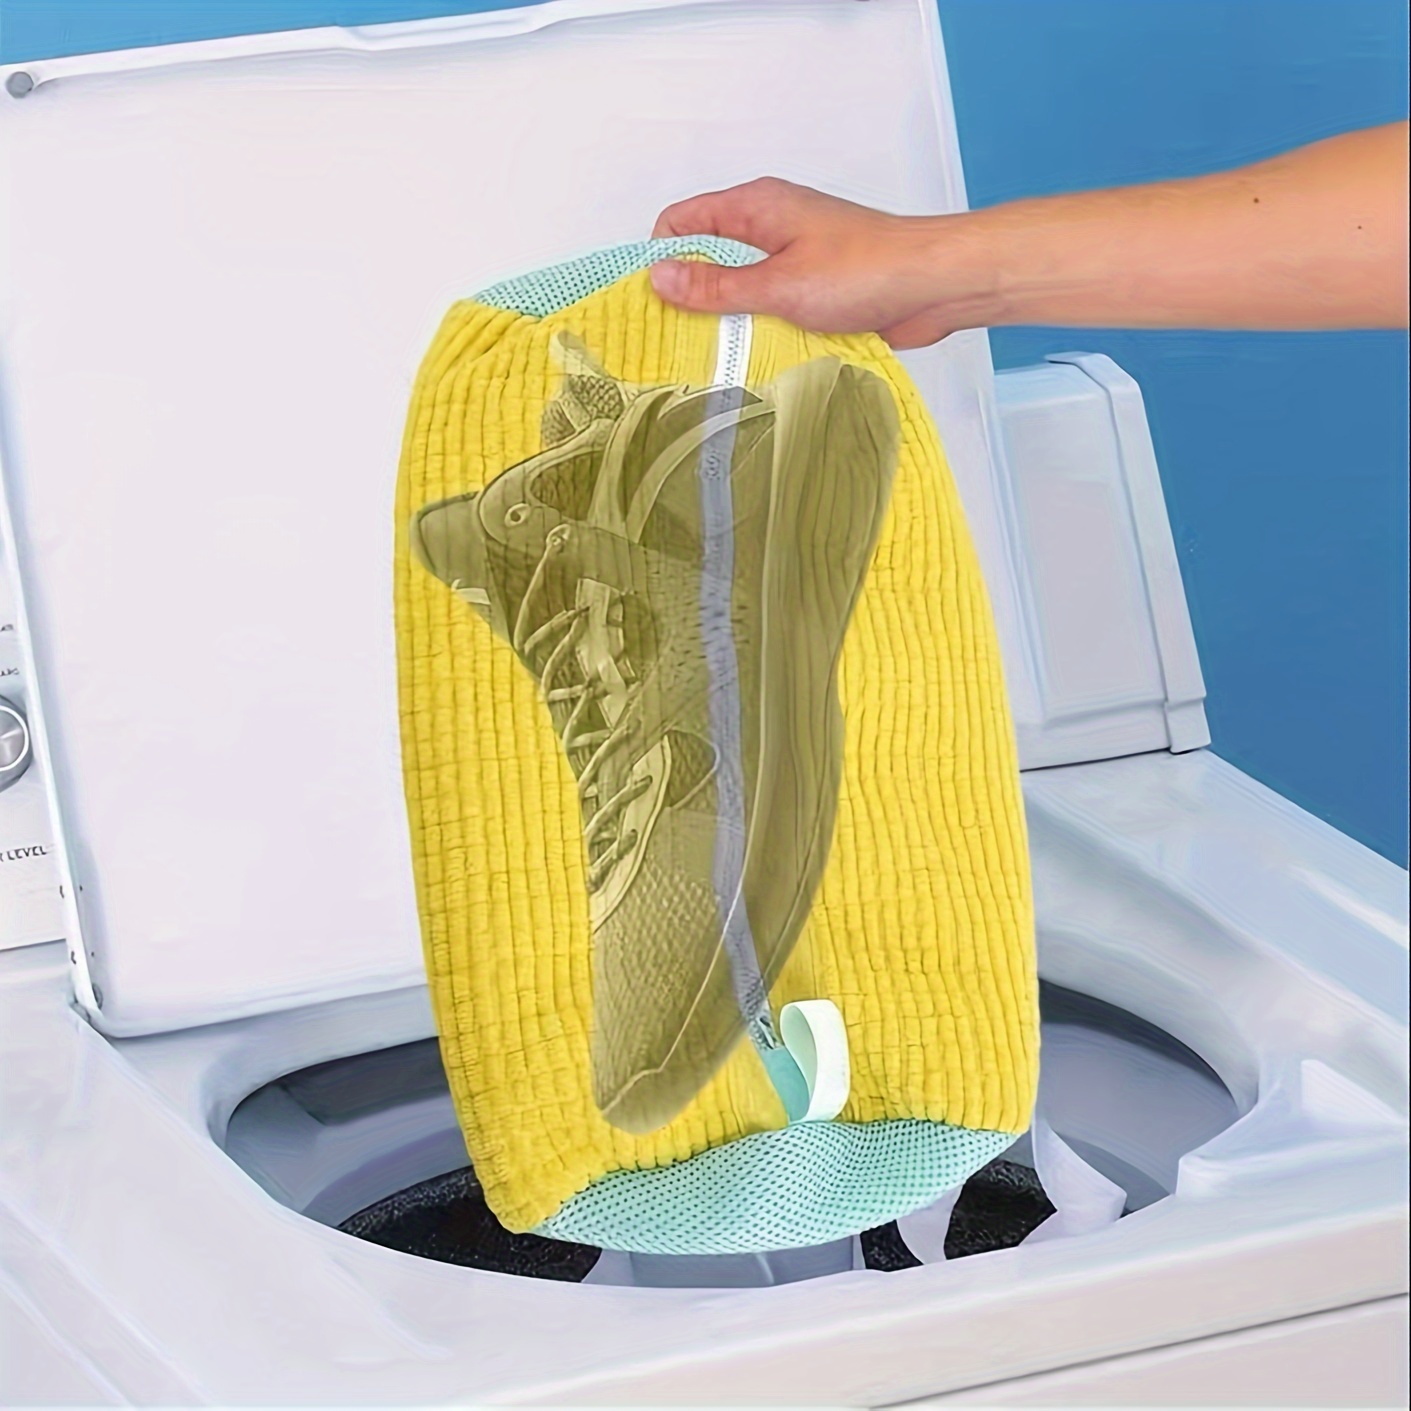 

Magic Shoe Wash Bag For Washing Machines - Anti-deformation, Protective Laundry Bag With Zipper Closure Laundry Wash Bag Mesh Laundry Bag